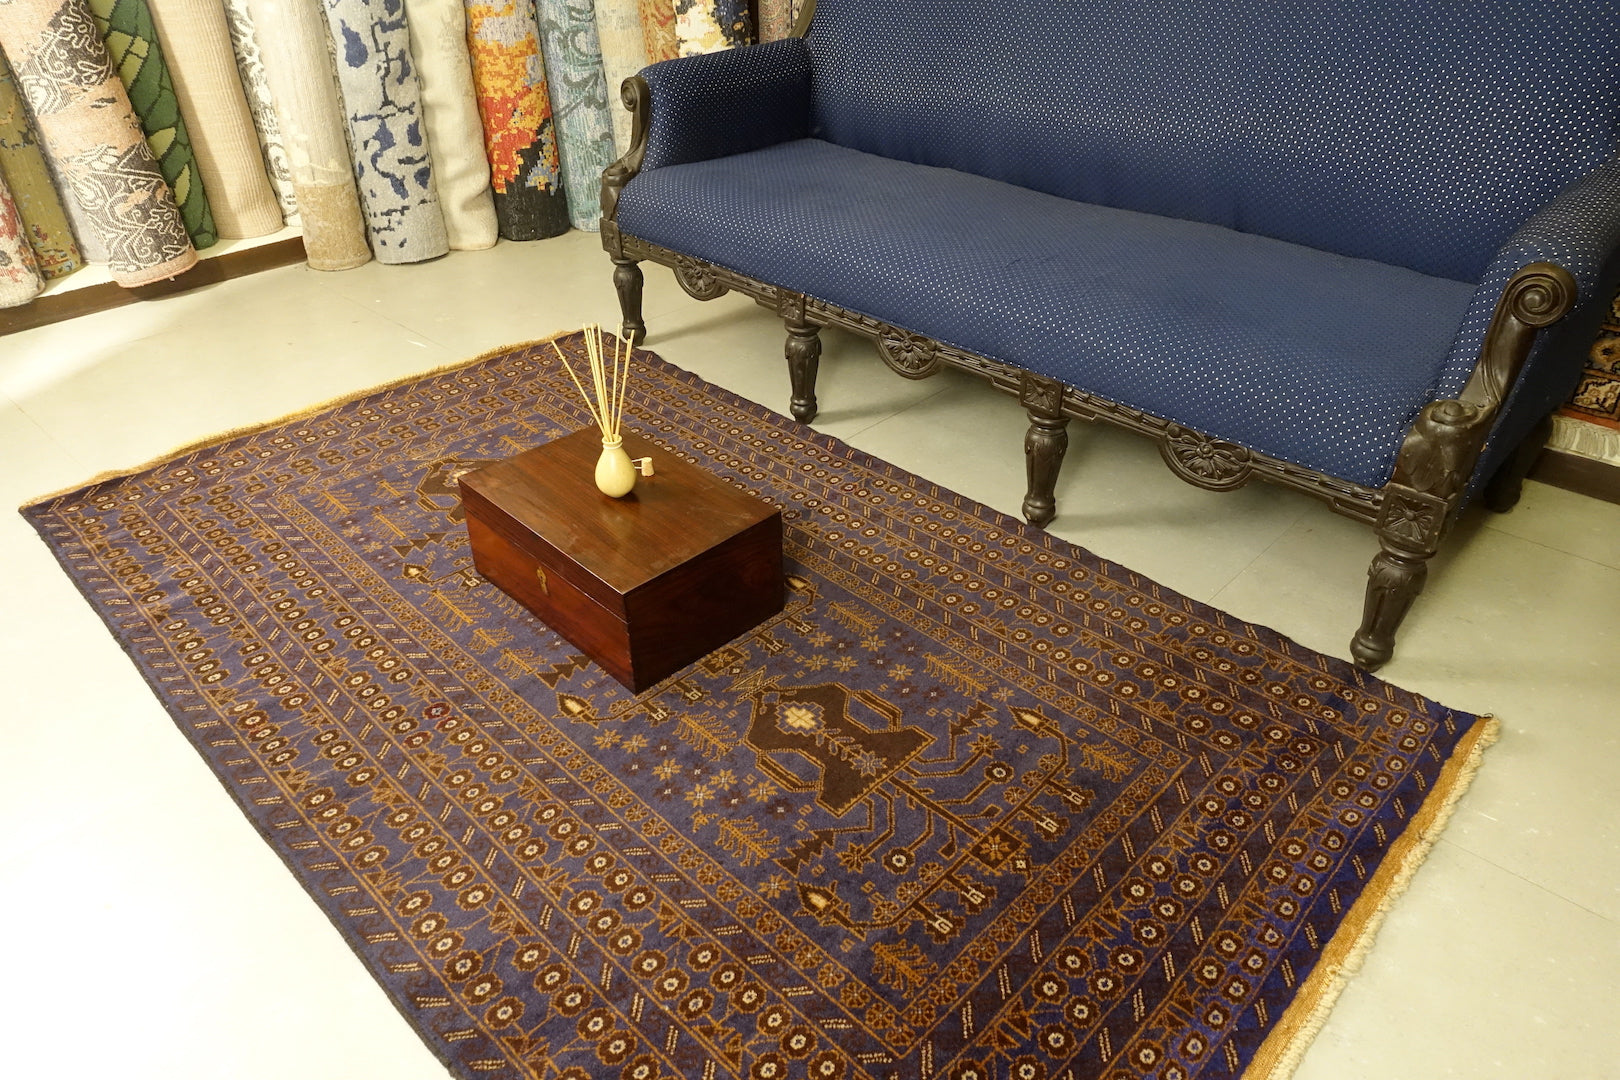 A 4 by 7 feet afghan wool rug. The colours used are typically blue, brown, beige and tan.